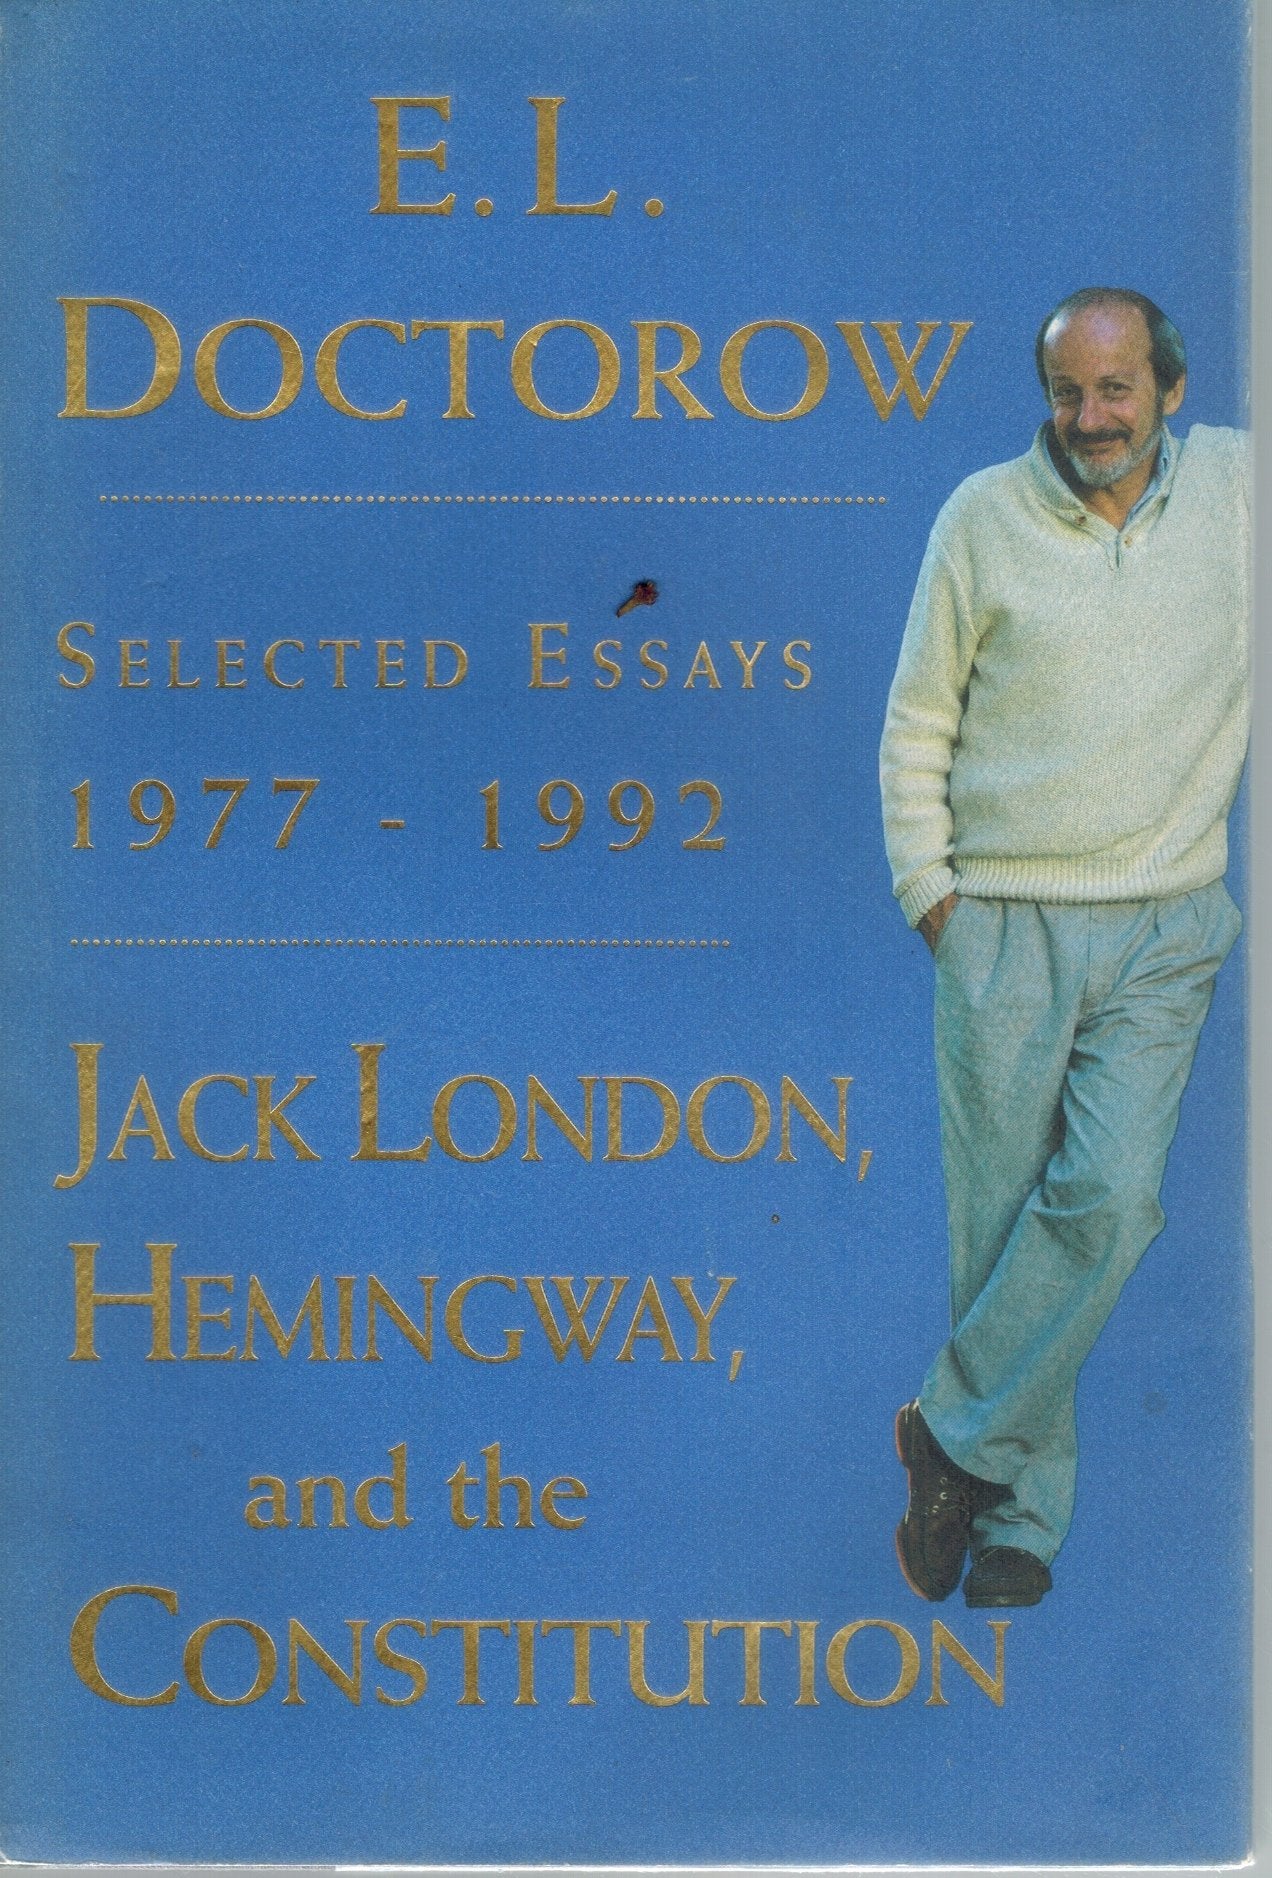 Jack London, Hemingway, and the Constitution : Selected Essays, 1977-1992  by Doctorow, E. L.